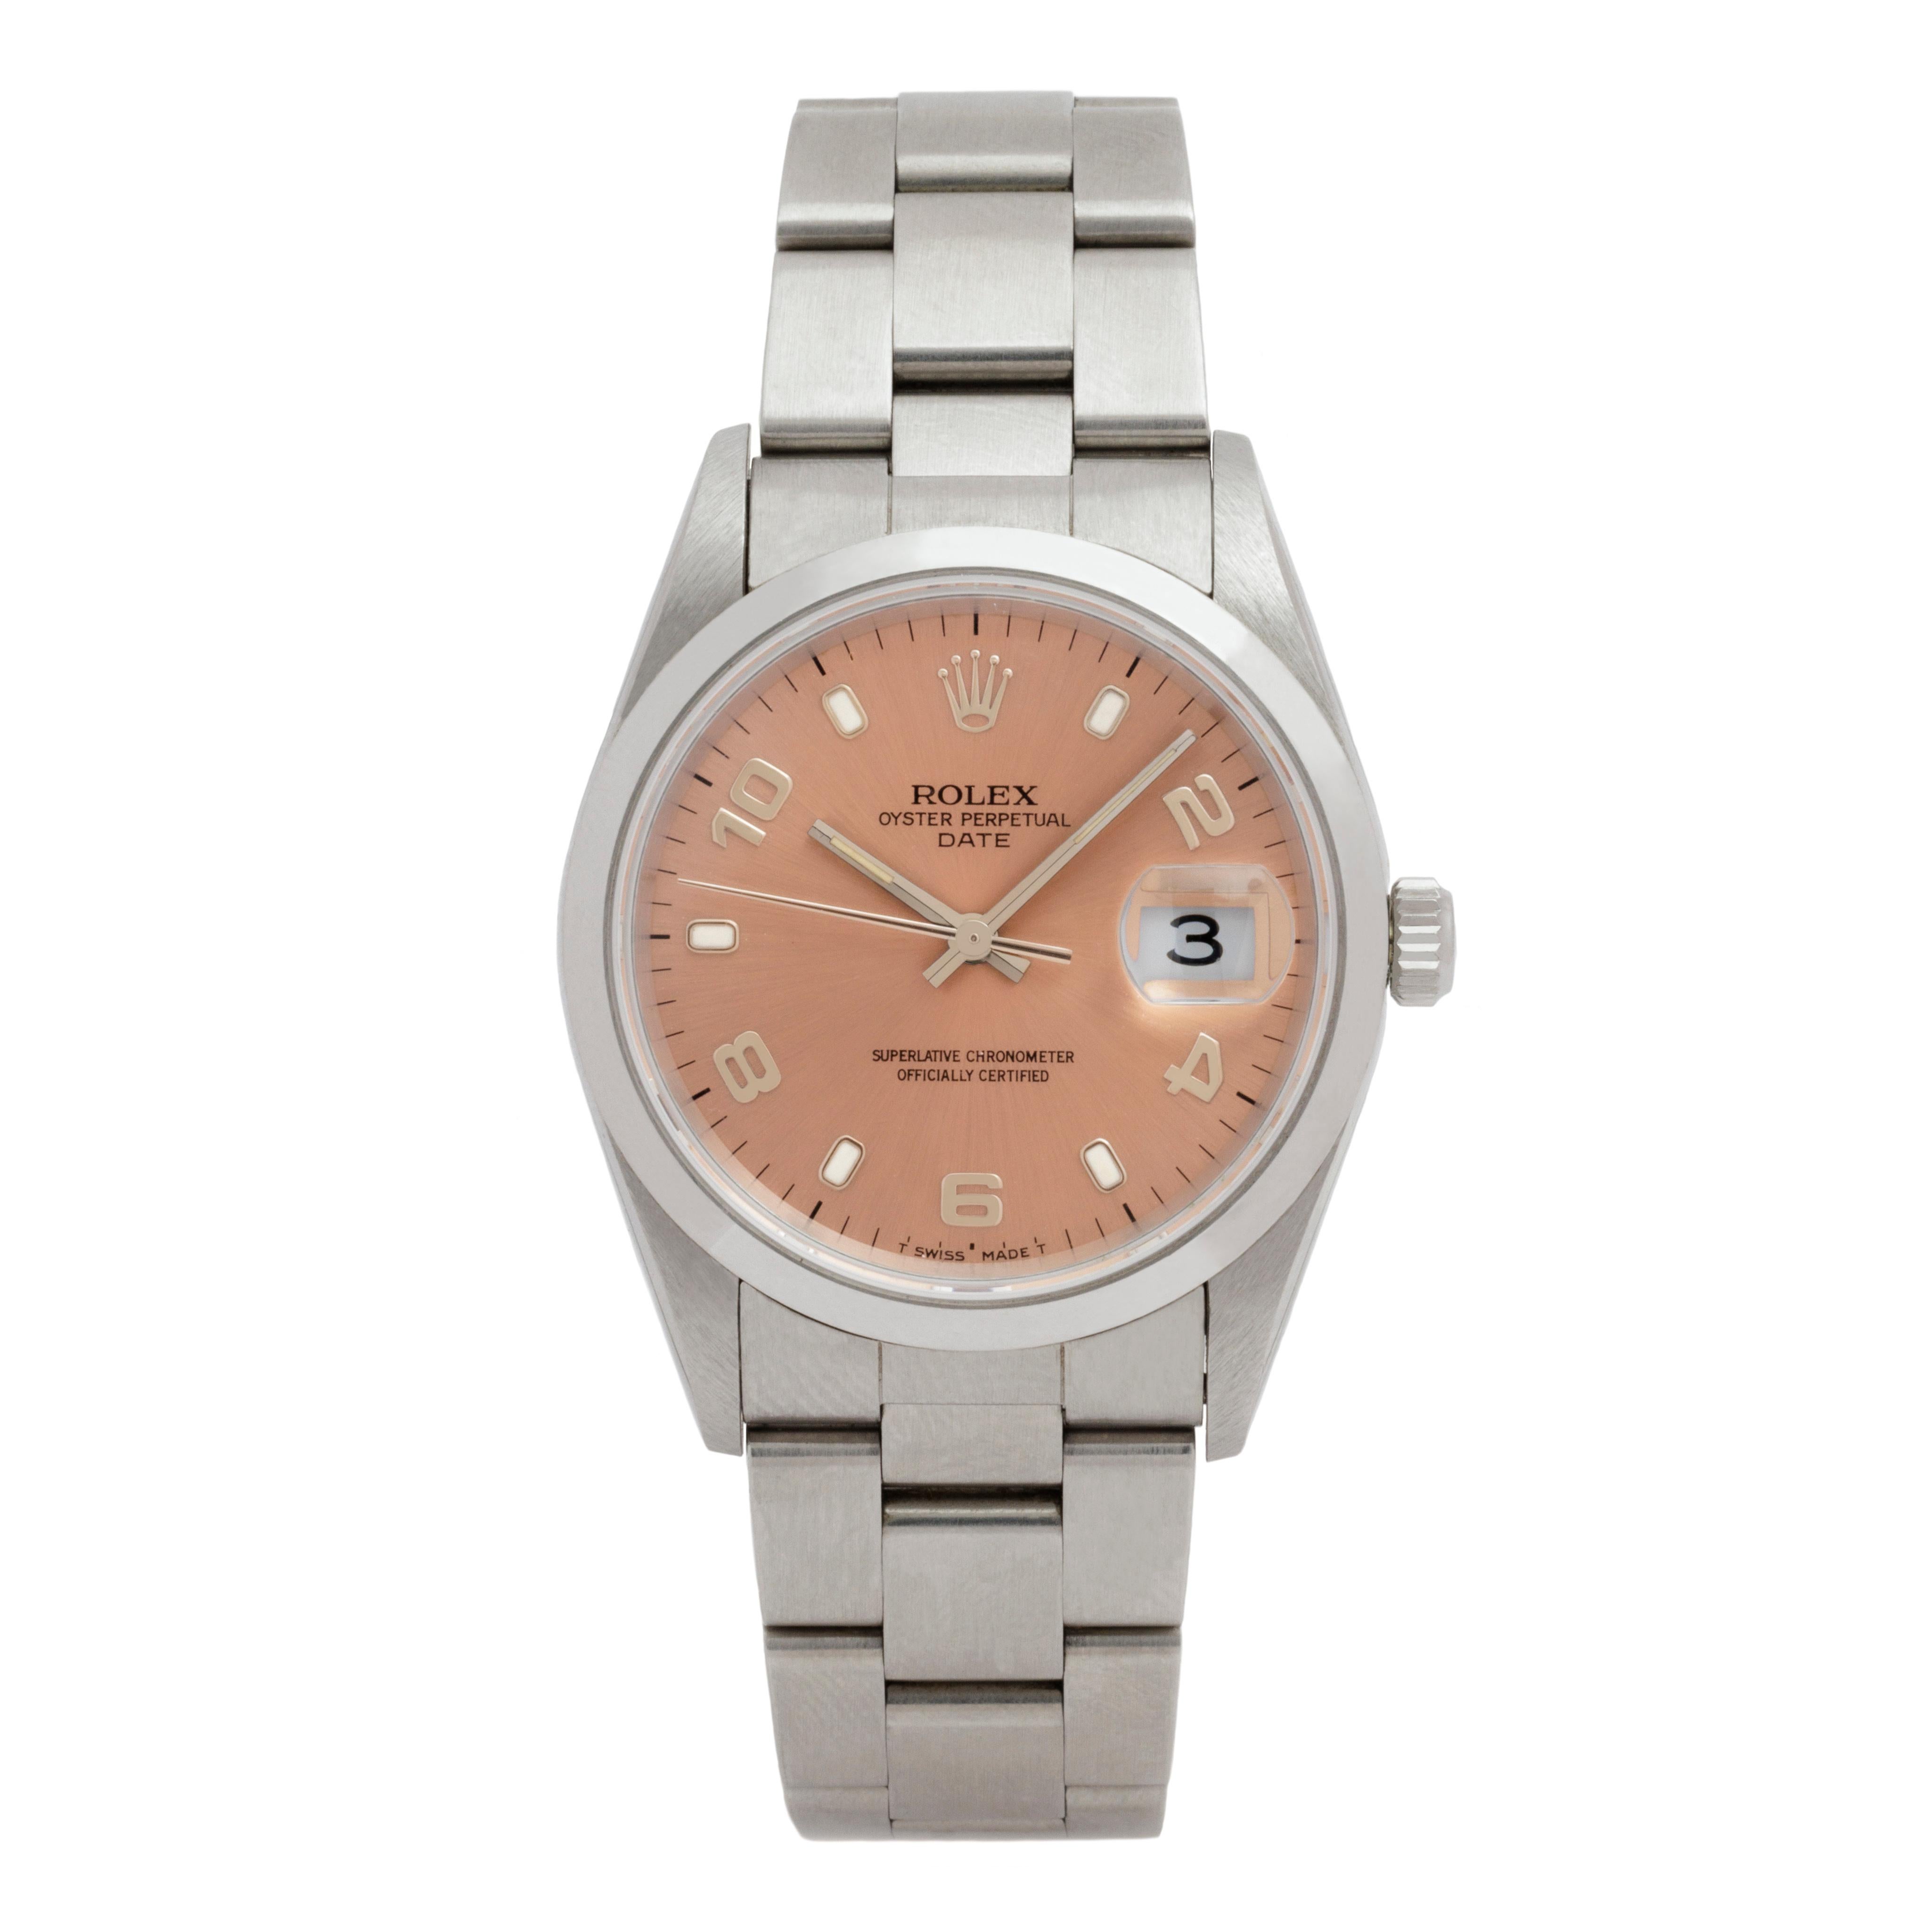 1995 Rolex Date 
Model 15200 Serial W84XXX, 
Stainless Steel
34mm Dial
Salmon Dial
Automatic Movement
Made in Switzerland

Stephanie Windsor guarantees the proper functioning of this watch mechanism for ONE year from the purchase date. Our watches